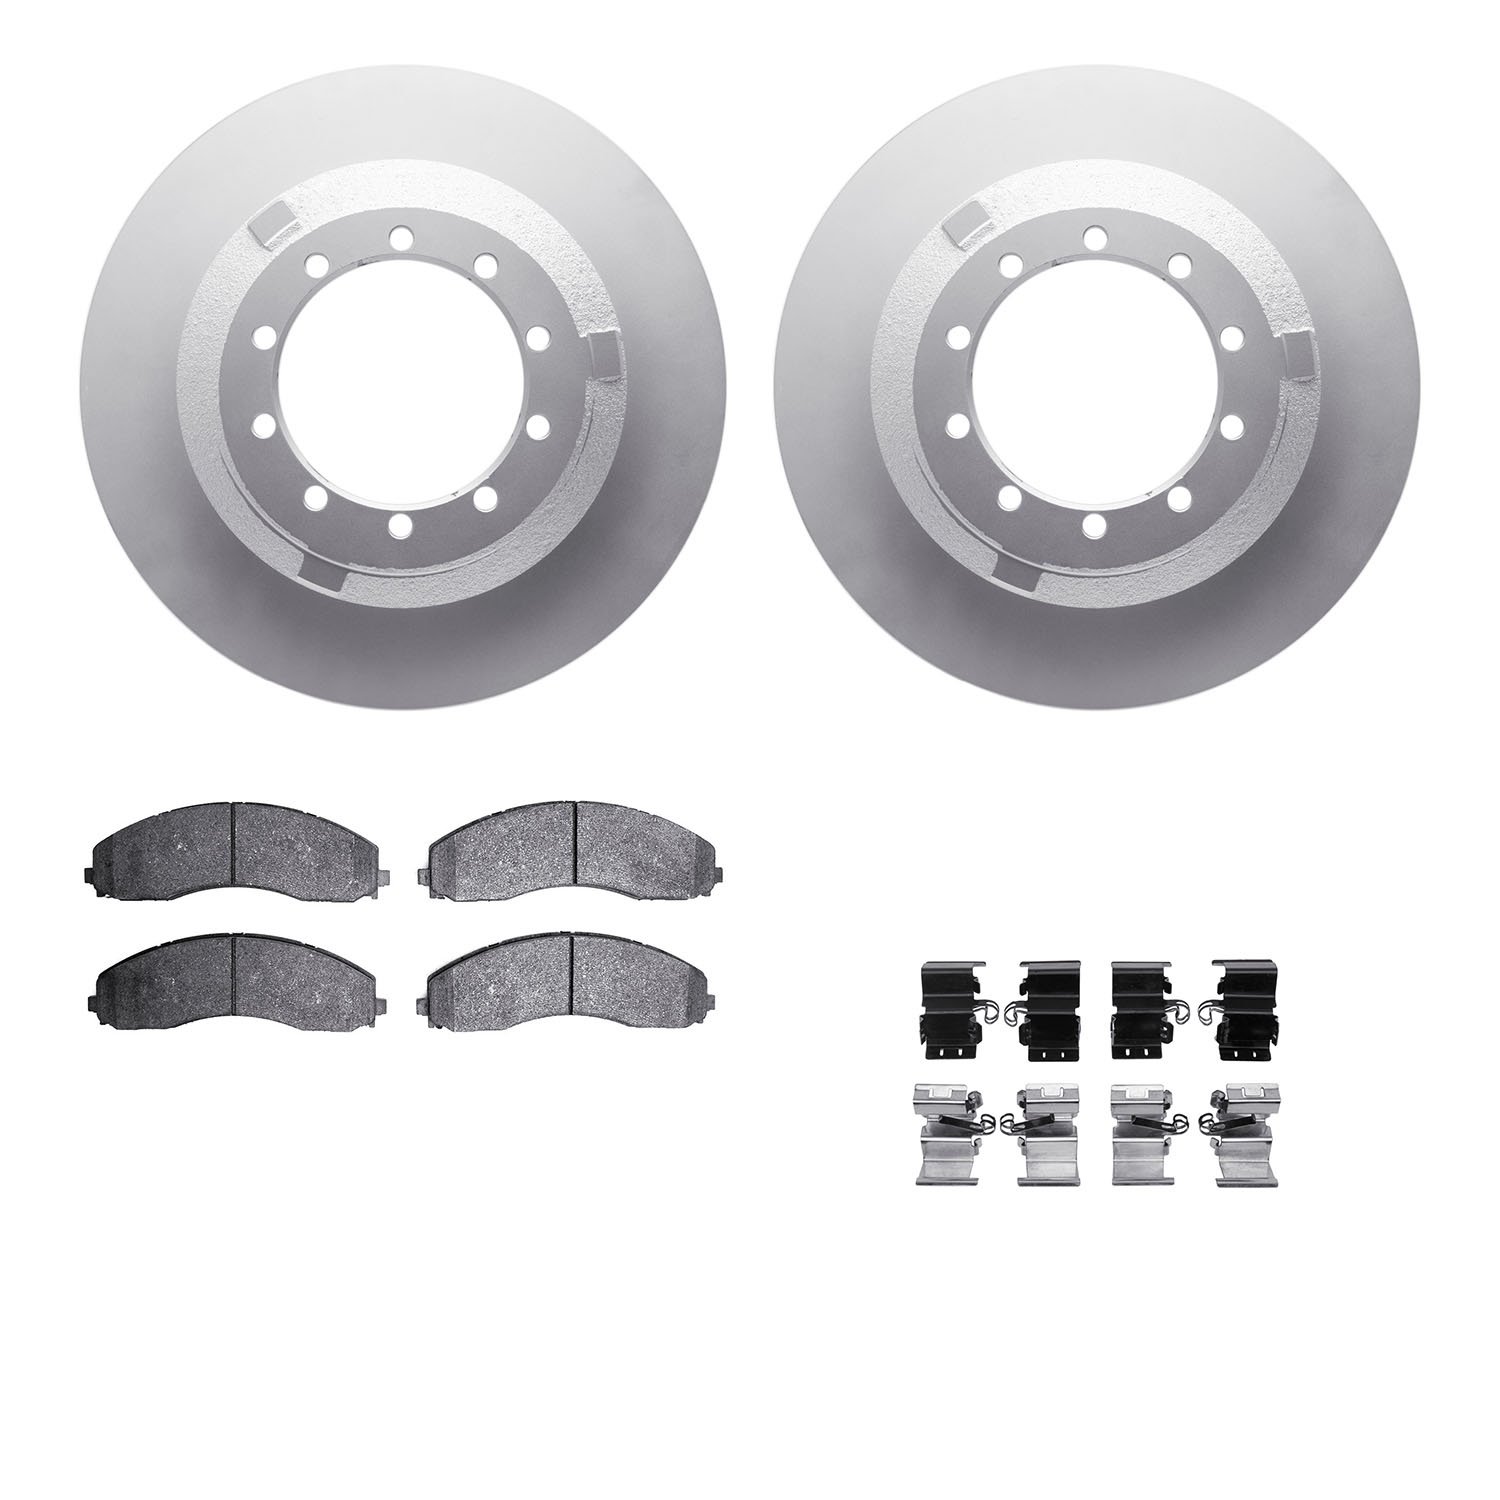 4412-54079 Geospec Brake Rotors with Ultimate-Duty Brake Pads & Hardware, Fits Select Ford/Lincoln/Mercury/Mazda, Position: Rear